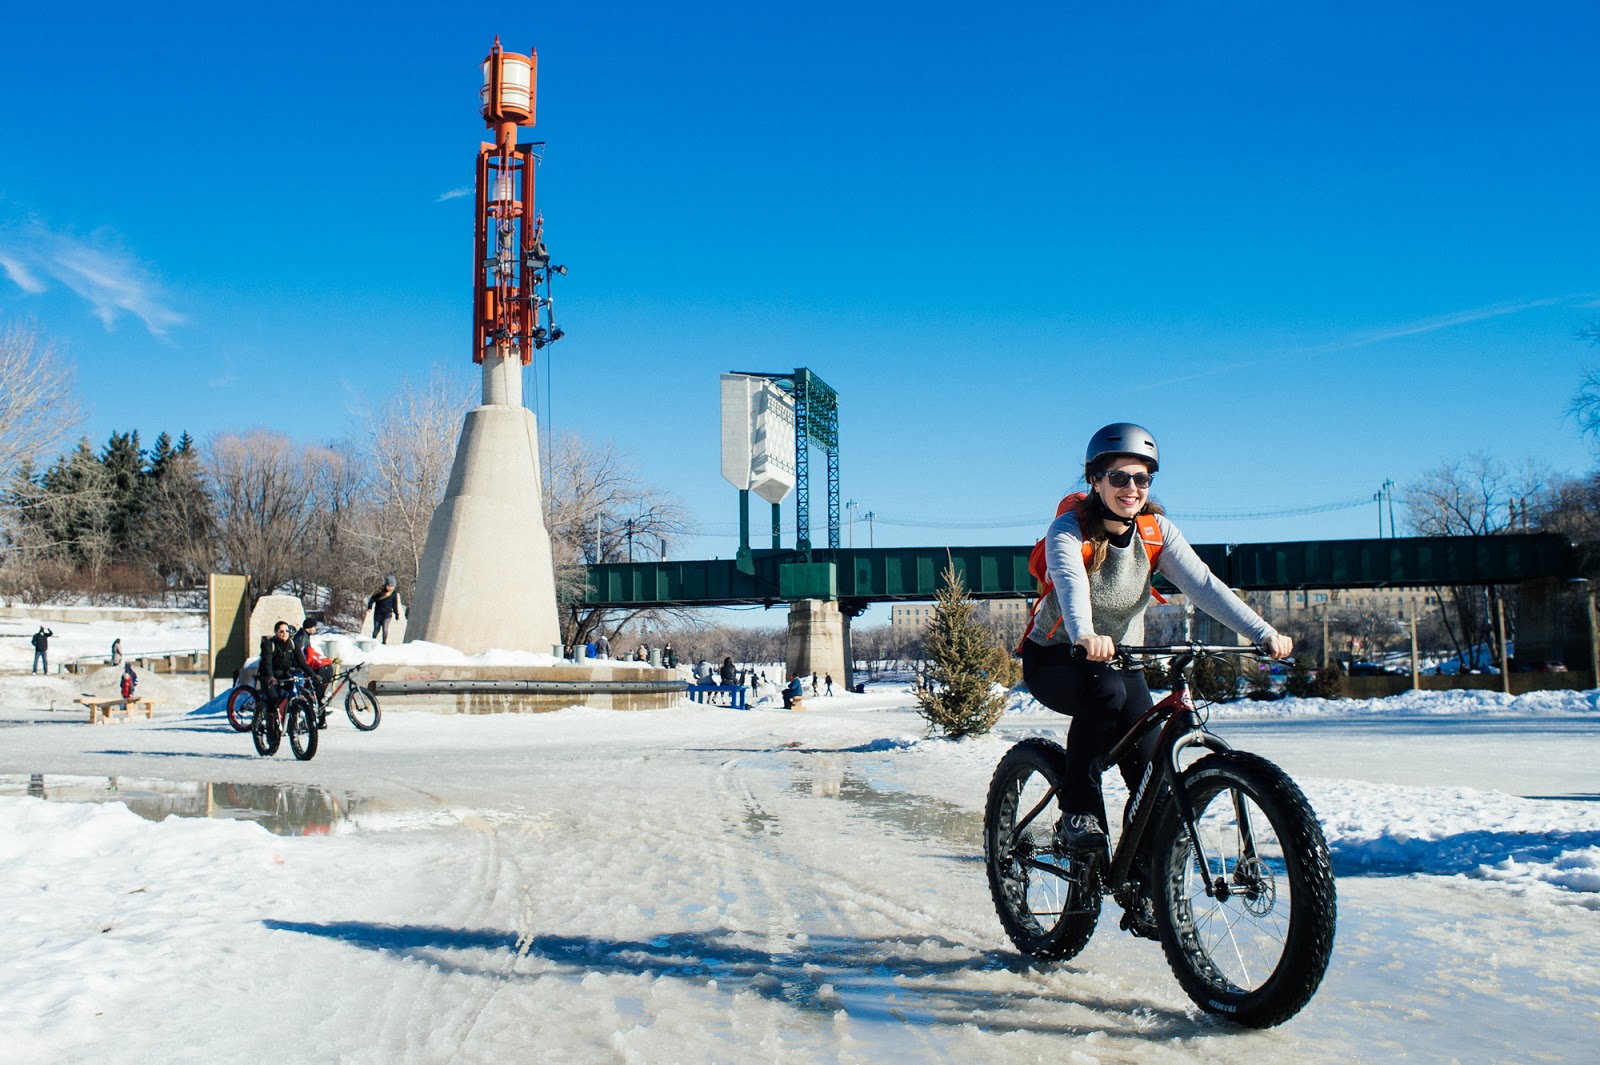 Get on your fat bikes + ride! | The Forks